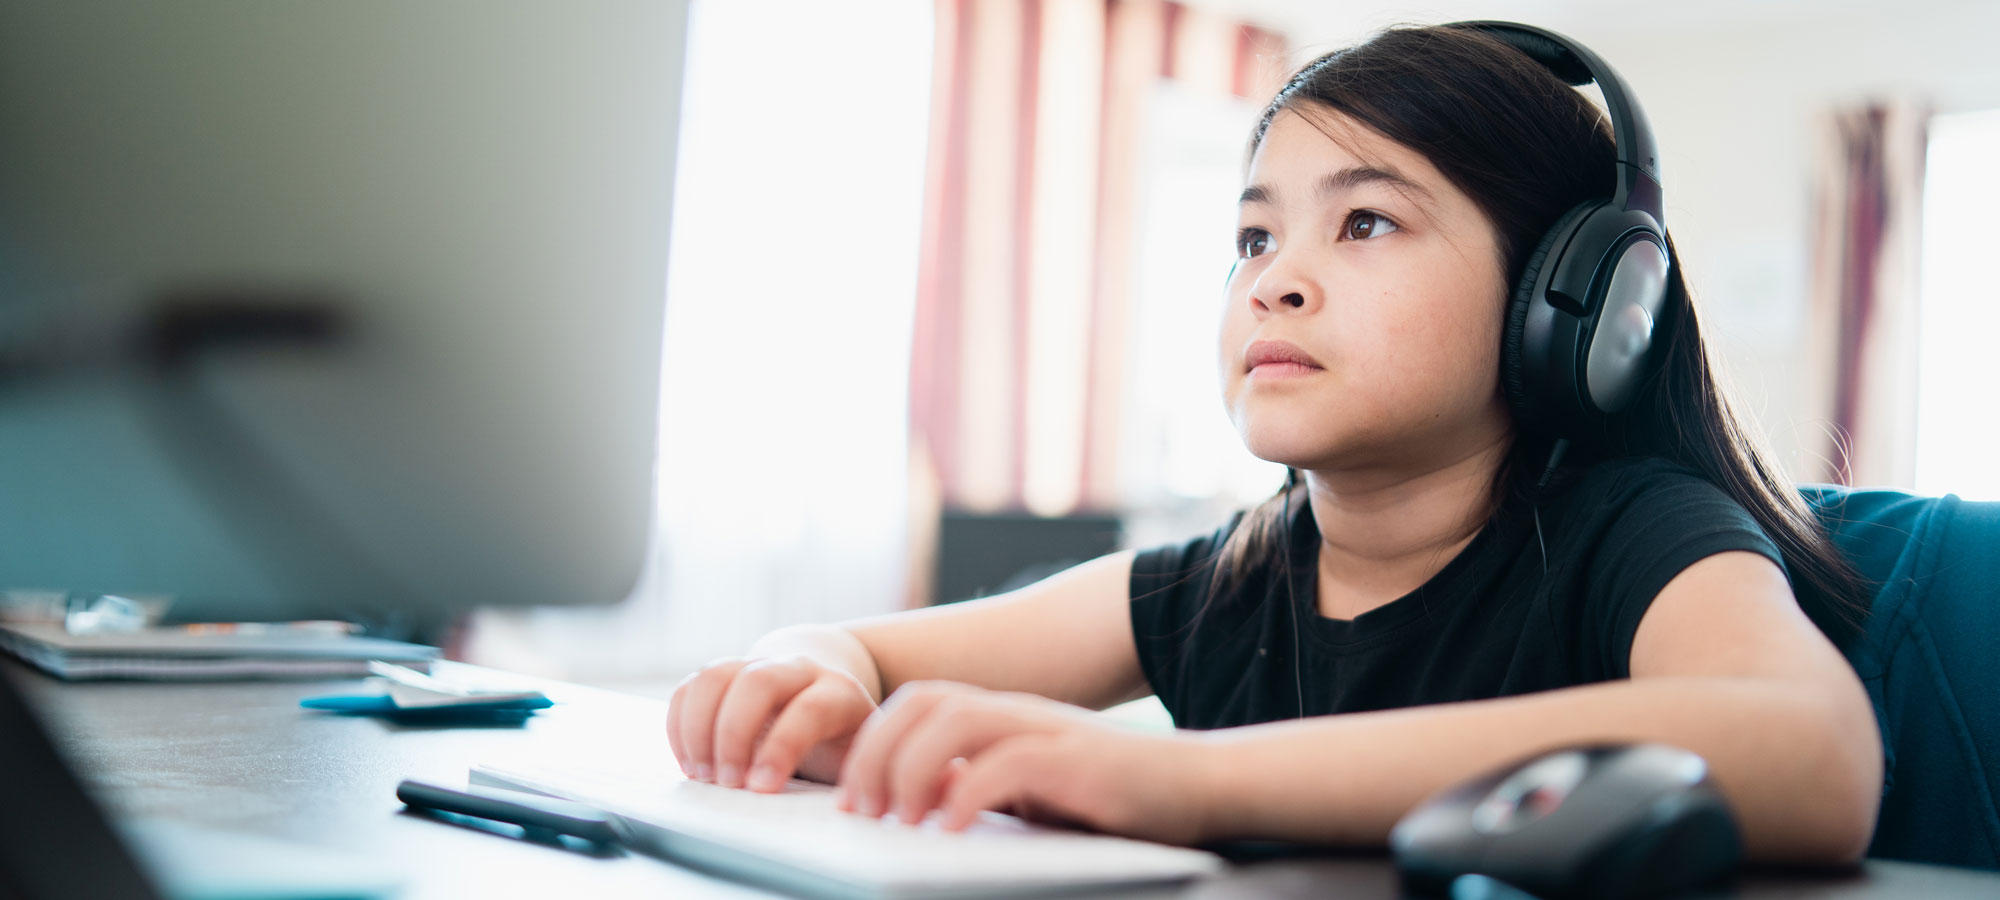 photo - Young Girl at Home on Computer Doing Homework